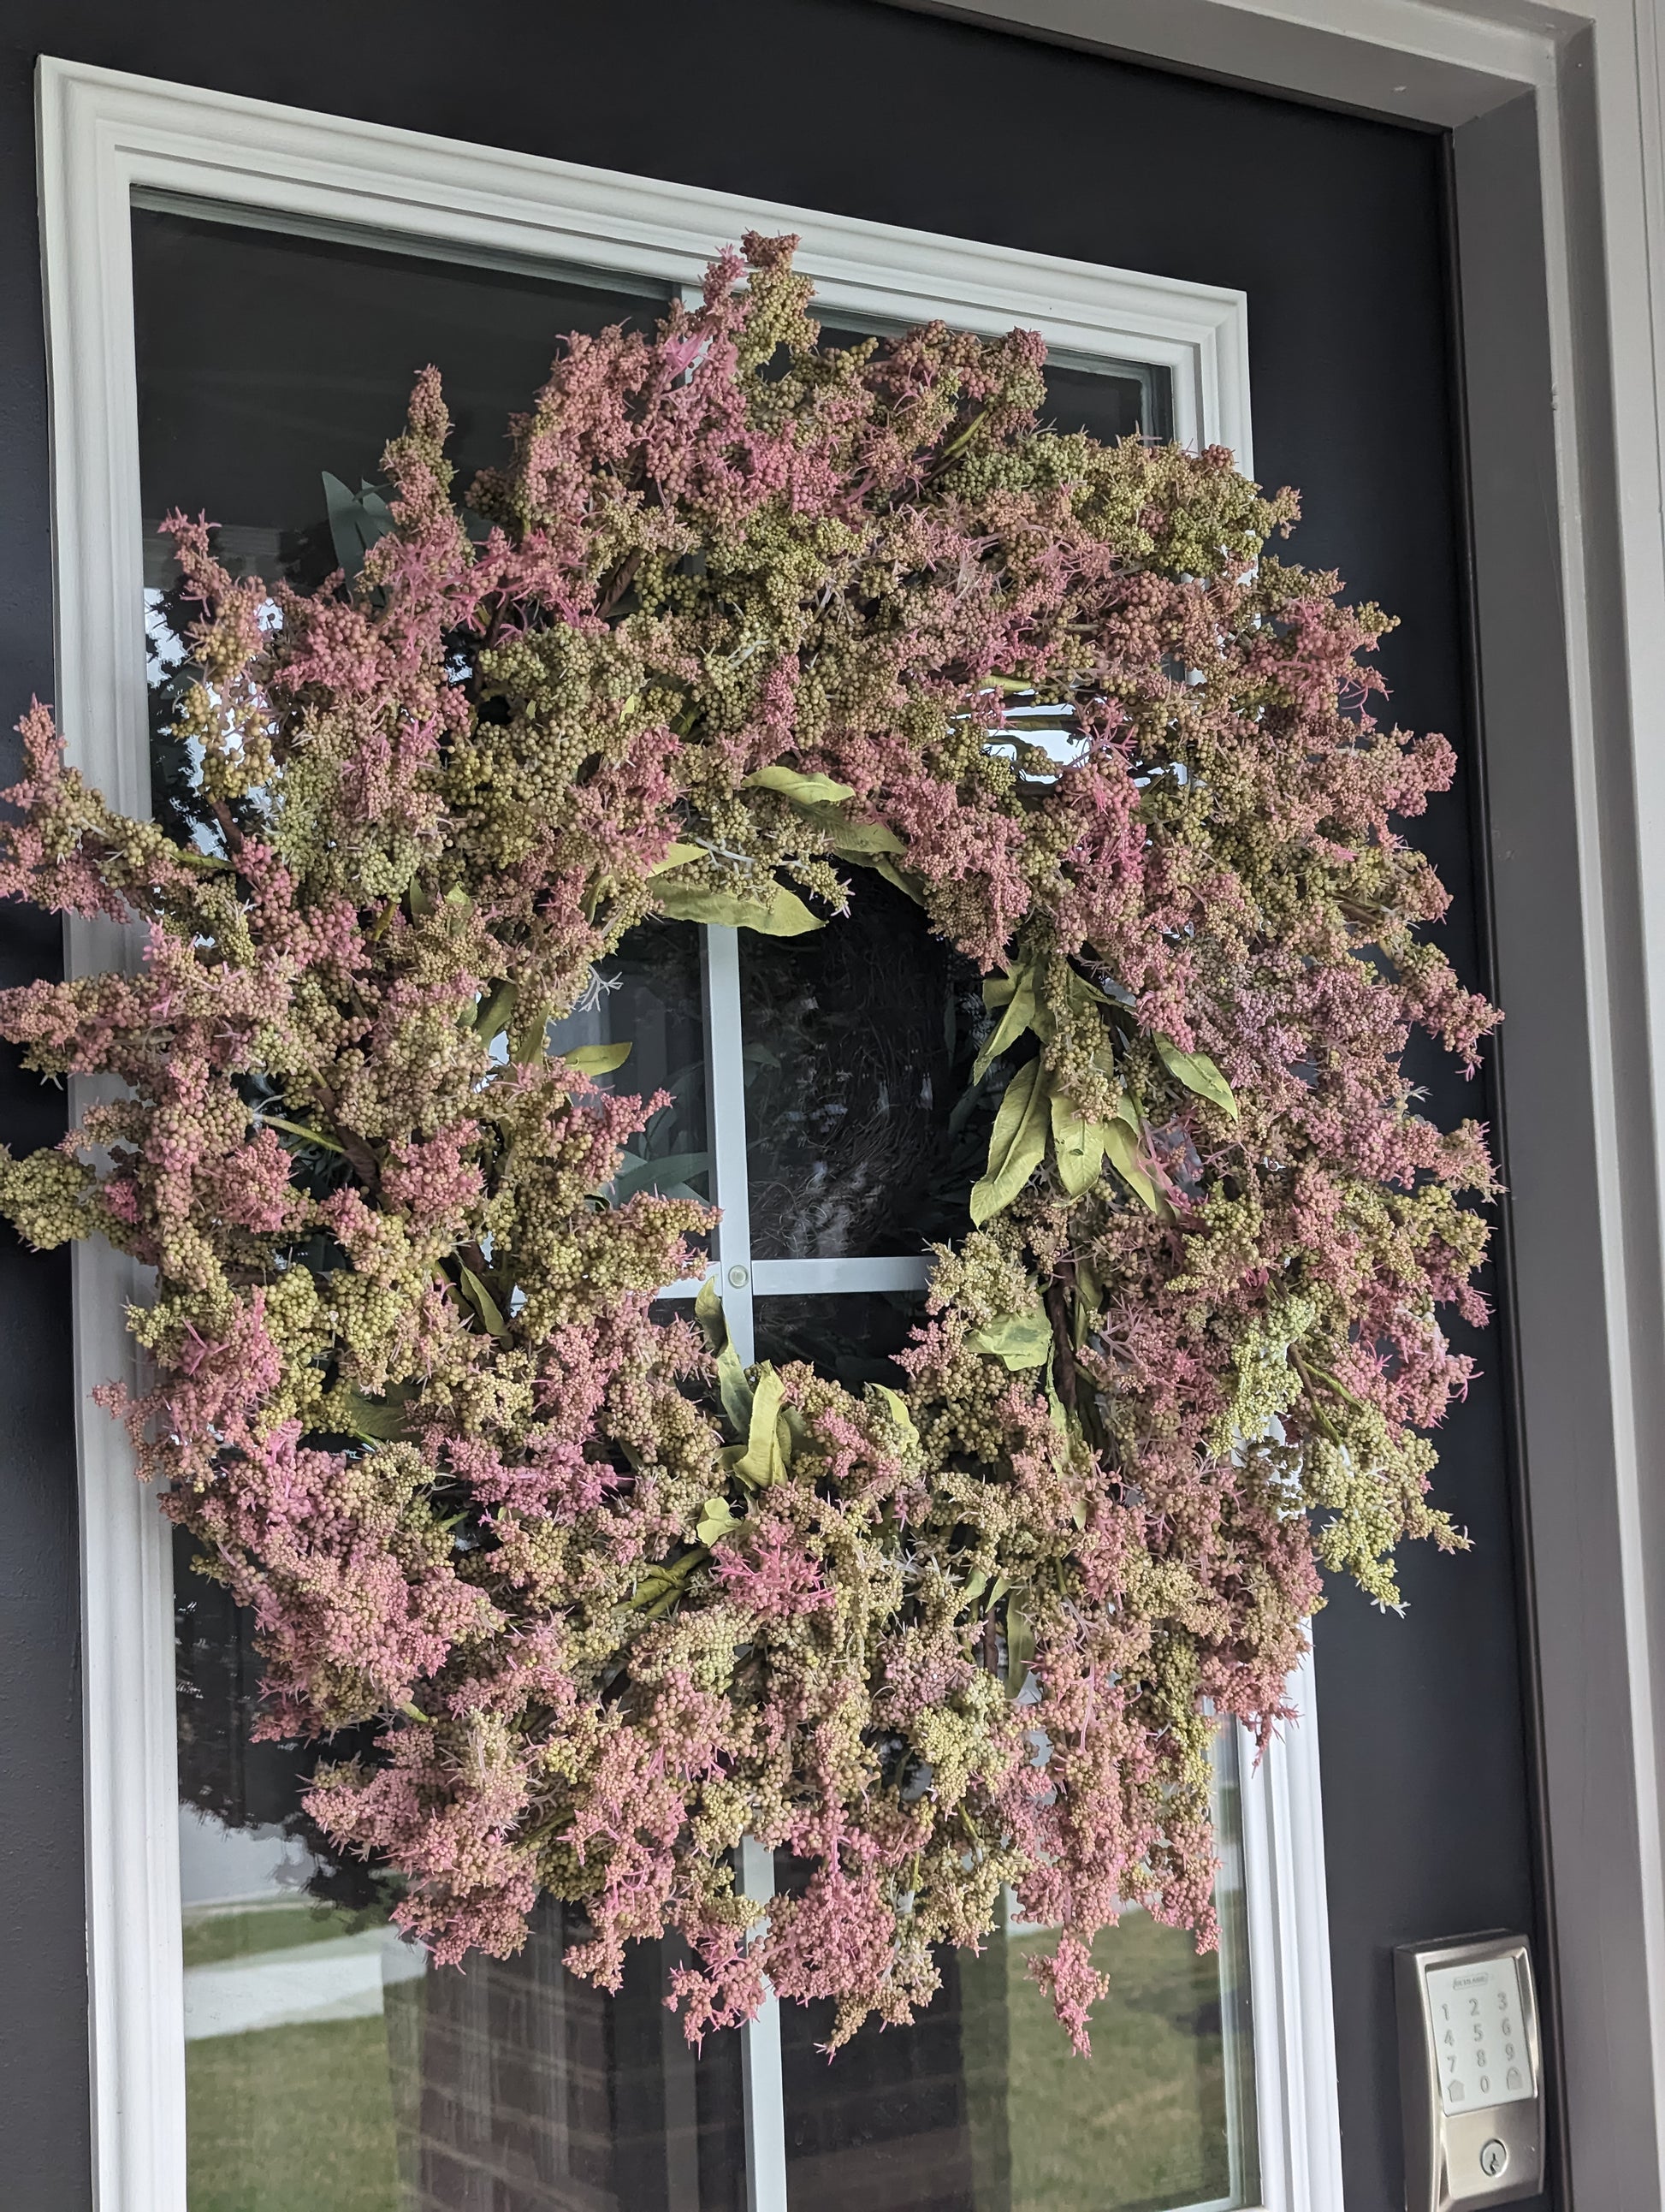 26-inch Artificial Wreath, featuring vibrant green leaves and beautiful clusters of green and pink buds. Perfect for adding a touch of springtime charm to your home, this artificial wreath is designed to look just like the real thing. The wreath's lifelike greenery stands out beautifully against a black door, making it a stylish addition to your home decor.